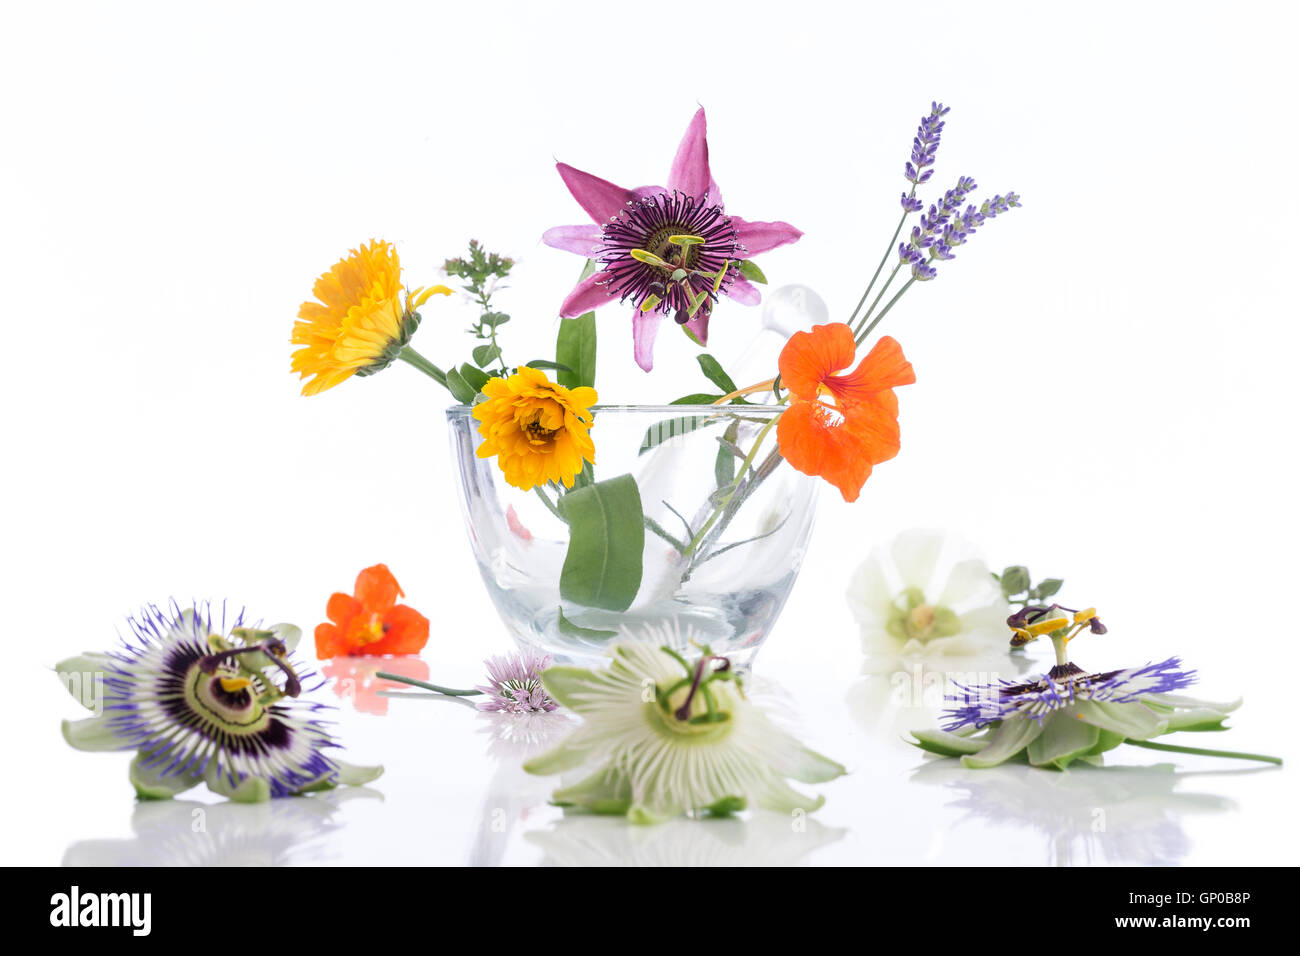 Natural herb and flower selection for herbal medicine Stock Photo